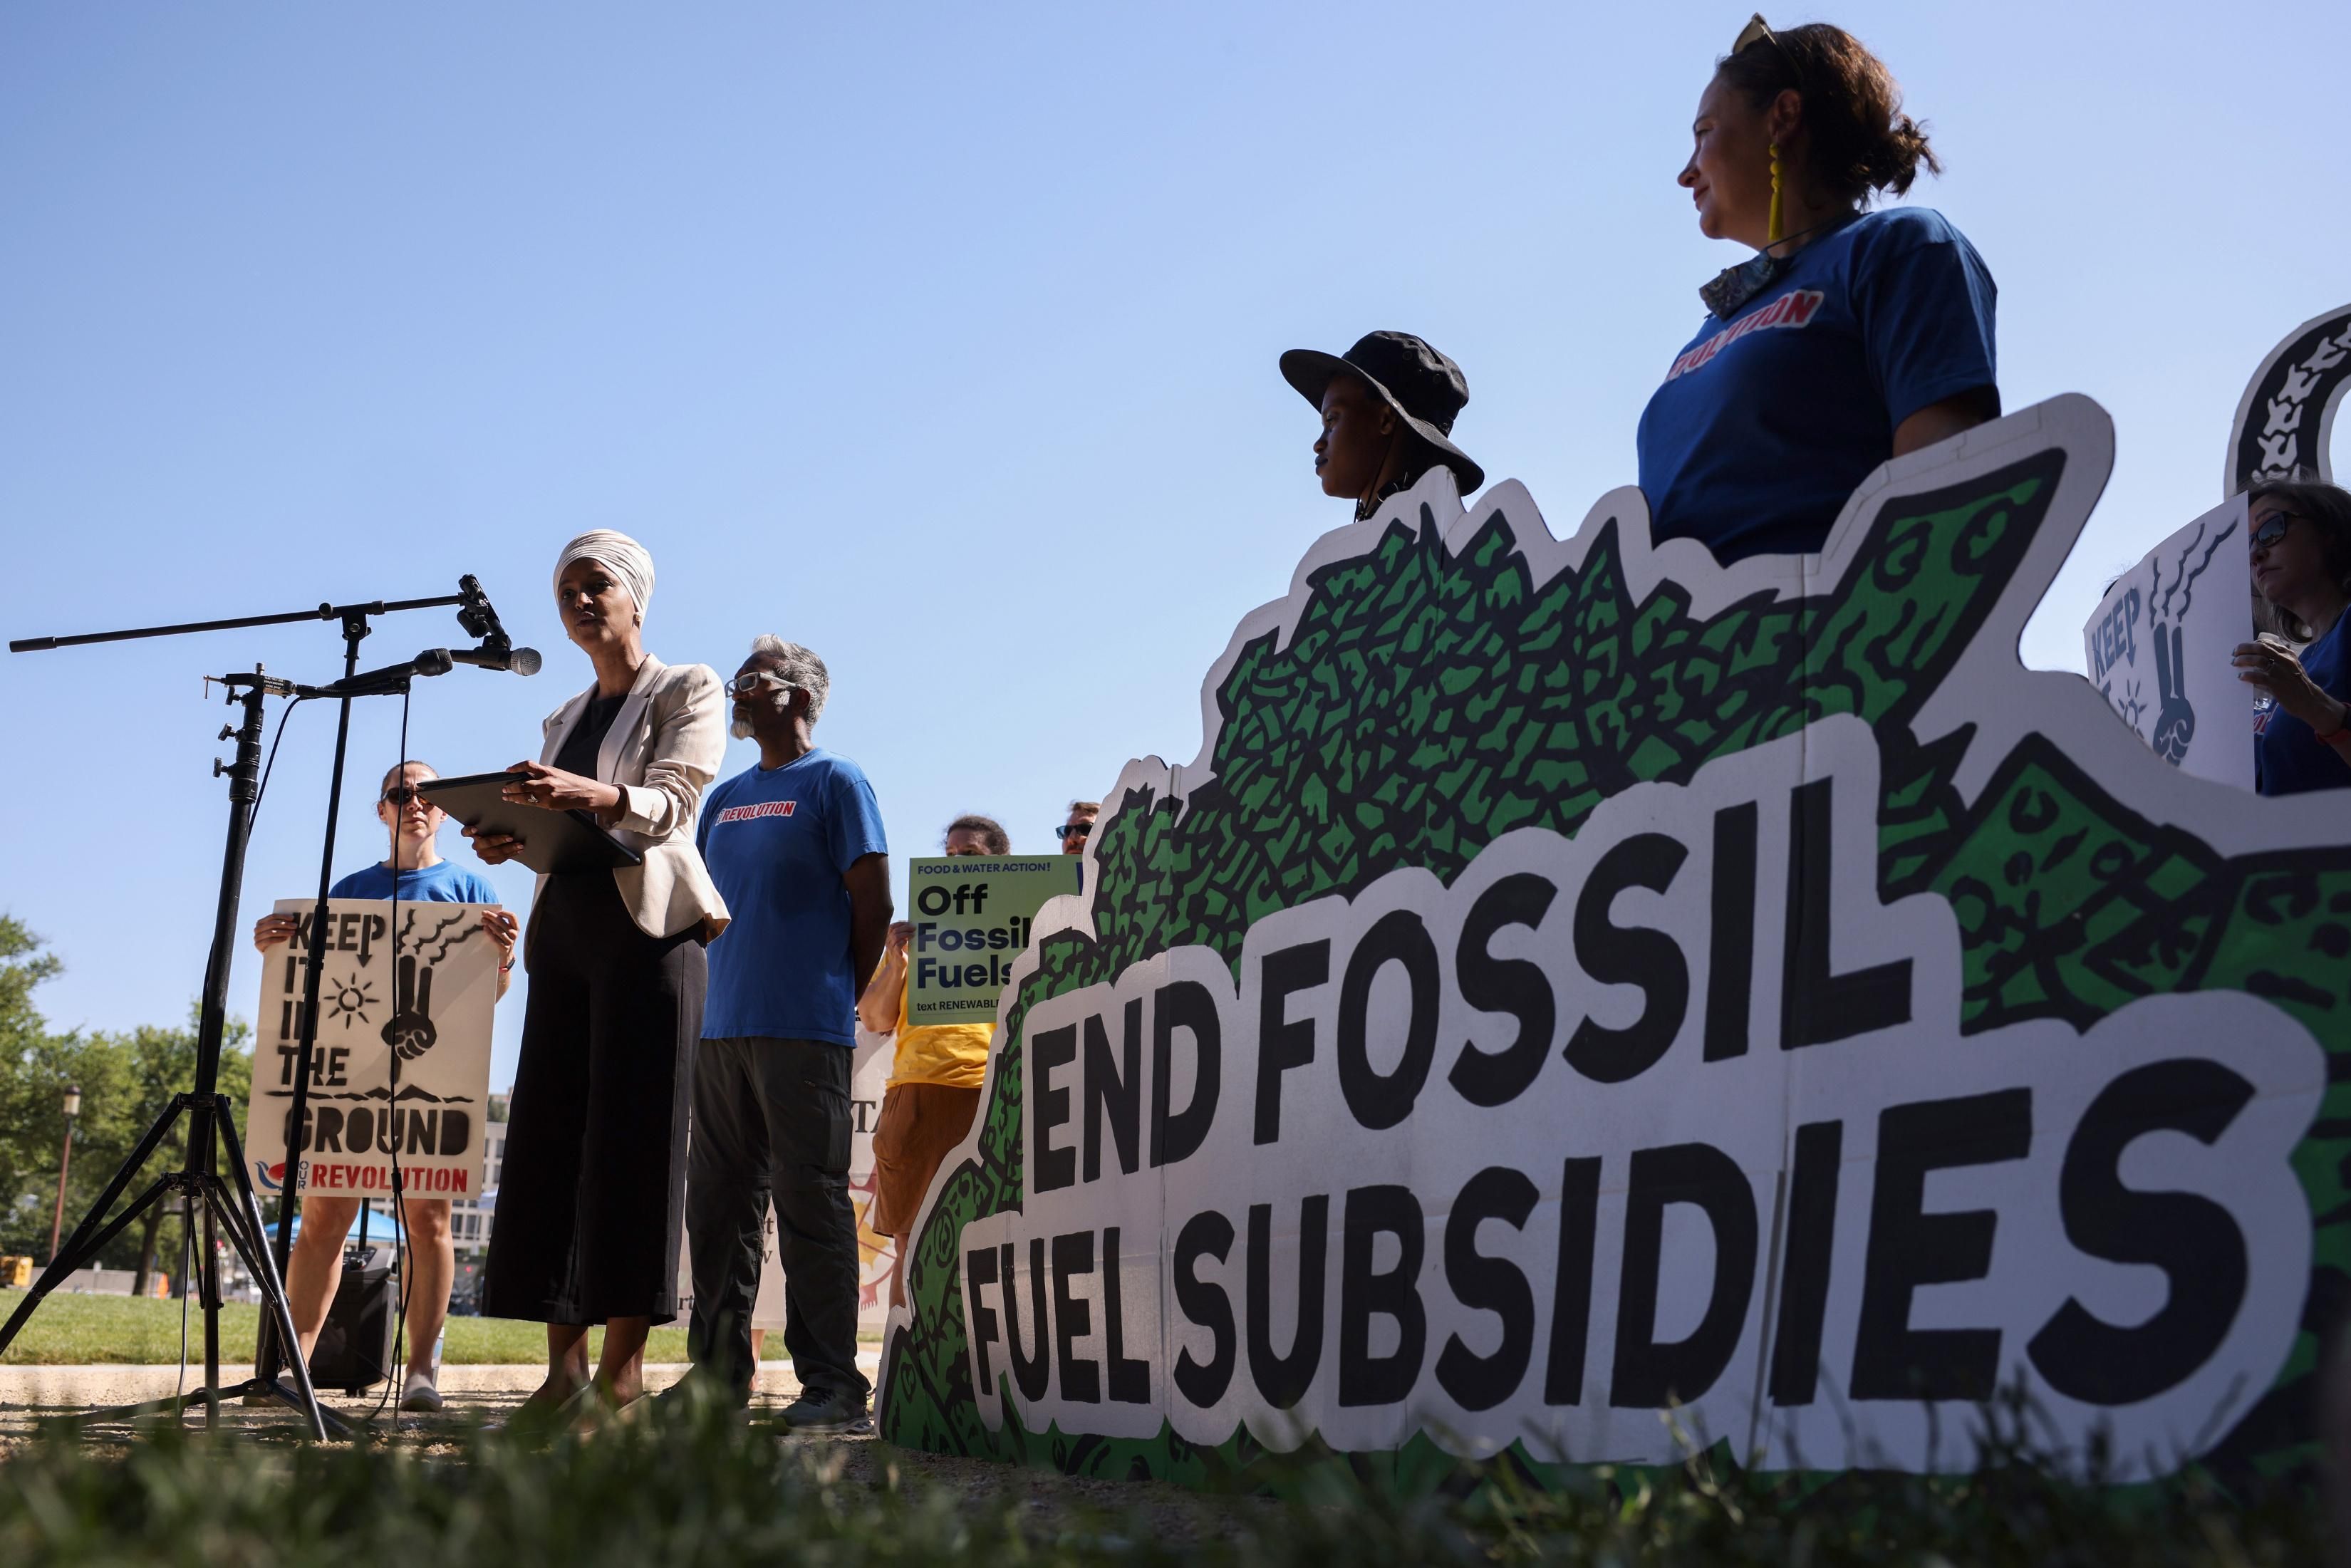 Rep. Ilhan Omar (D-Minn.) speaks at an "End Fossil Fuel" rally organized by Our Revolution near the U.S. Capitol on June 29, 2021 in Washington, D.C. Demonstrators called on Congress to take action in ending fossil fuel subsidies. (Photo: Anna Moneymaker via Getty Images)